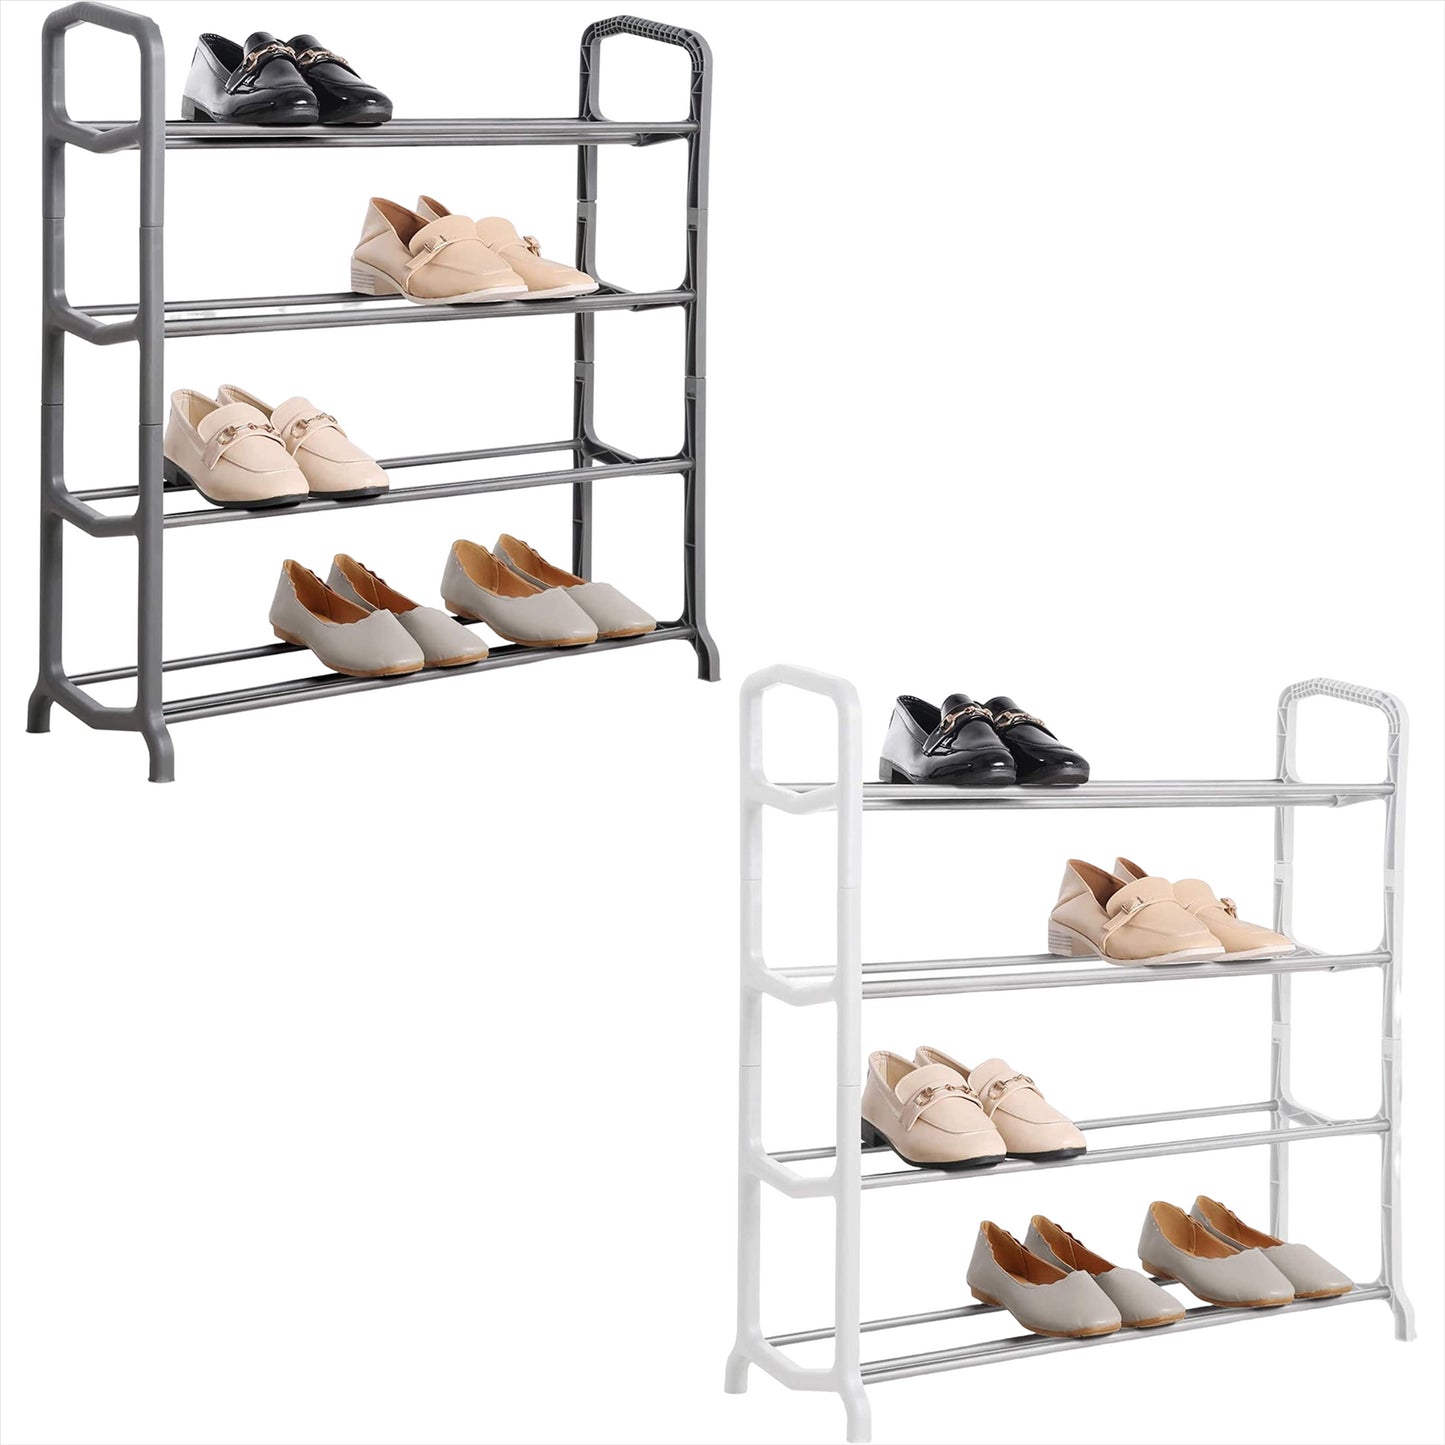 5-Tier Metal Shoe Rack Stand for Organized Shoe Storage